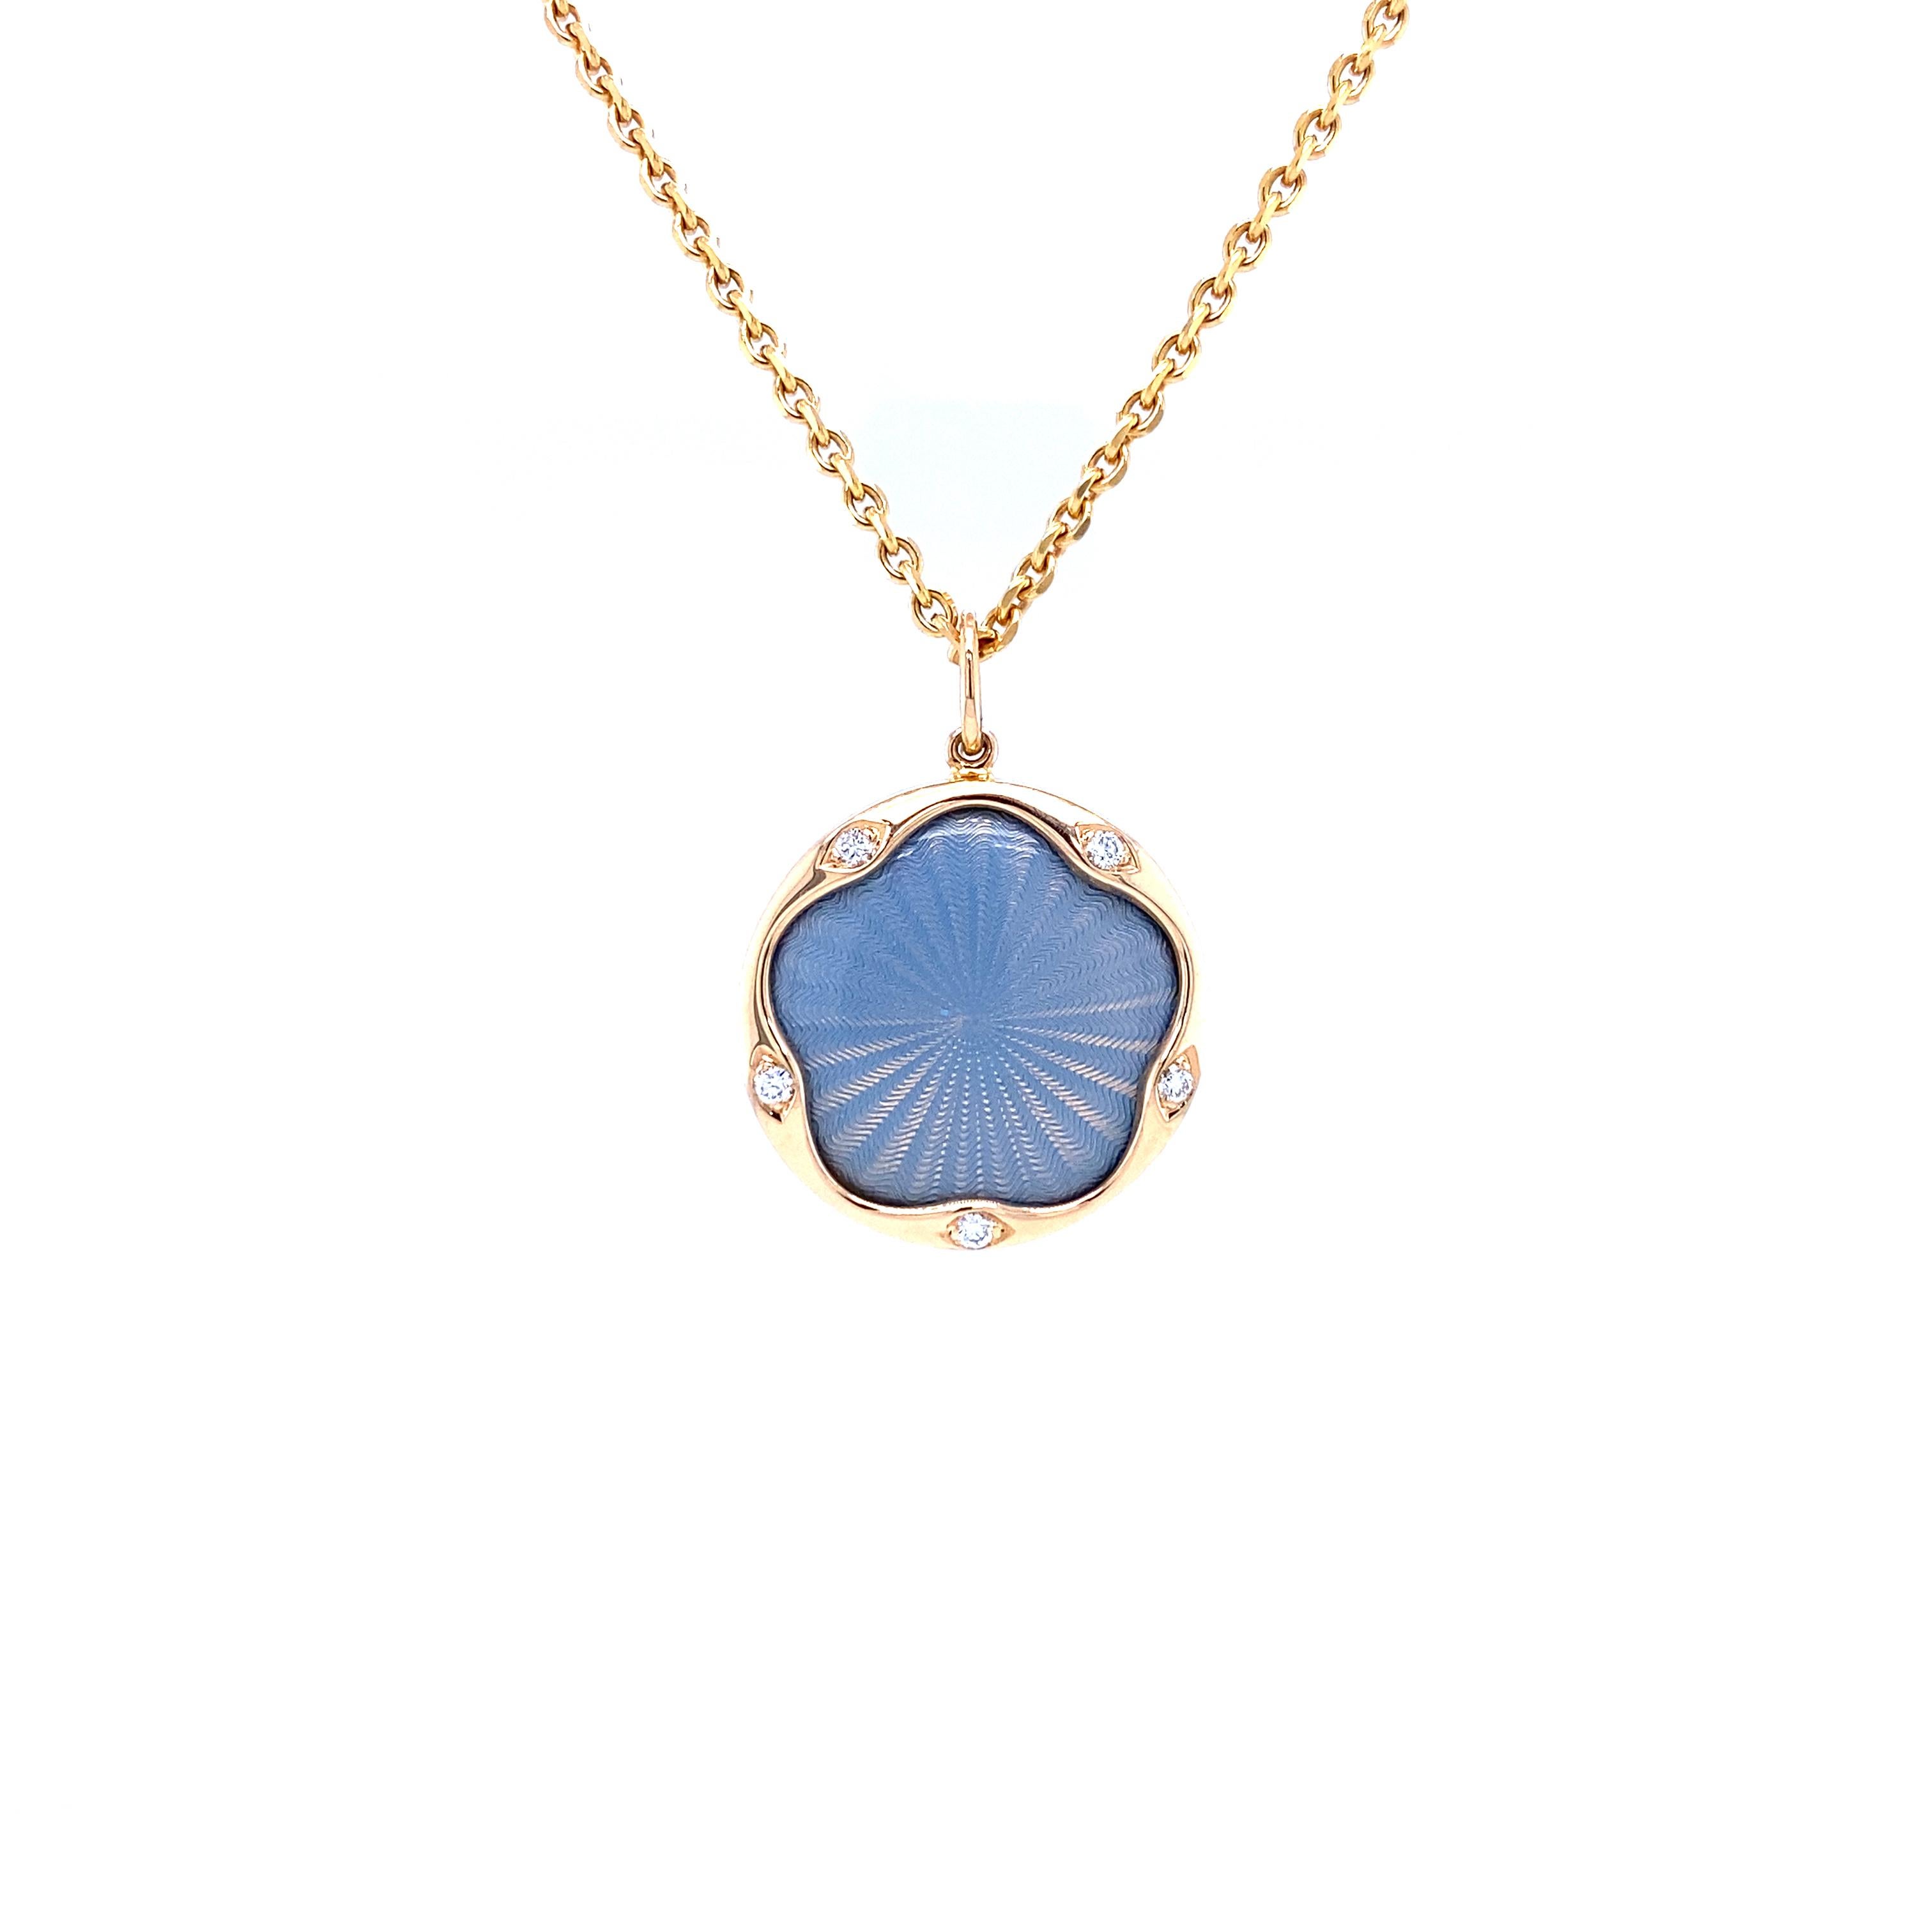 Victor Mayer round pendant necklace 18k rose gold, Macaron Collection, translucent opalescent turquoise vitreous enamel, guilloche, 5 diamonds total 0.07 ct, G VS, brilliant cut, diameter app. 19.0 mm

About the creator Victor Mayer
Victor Mayer is